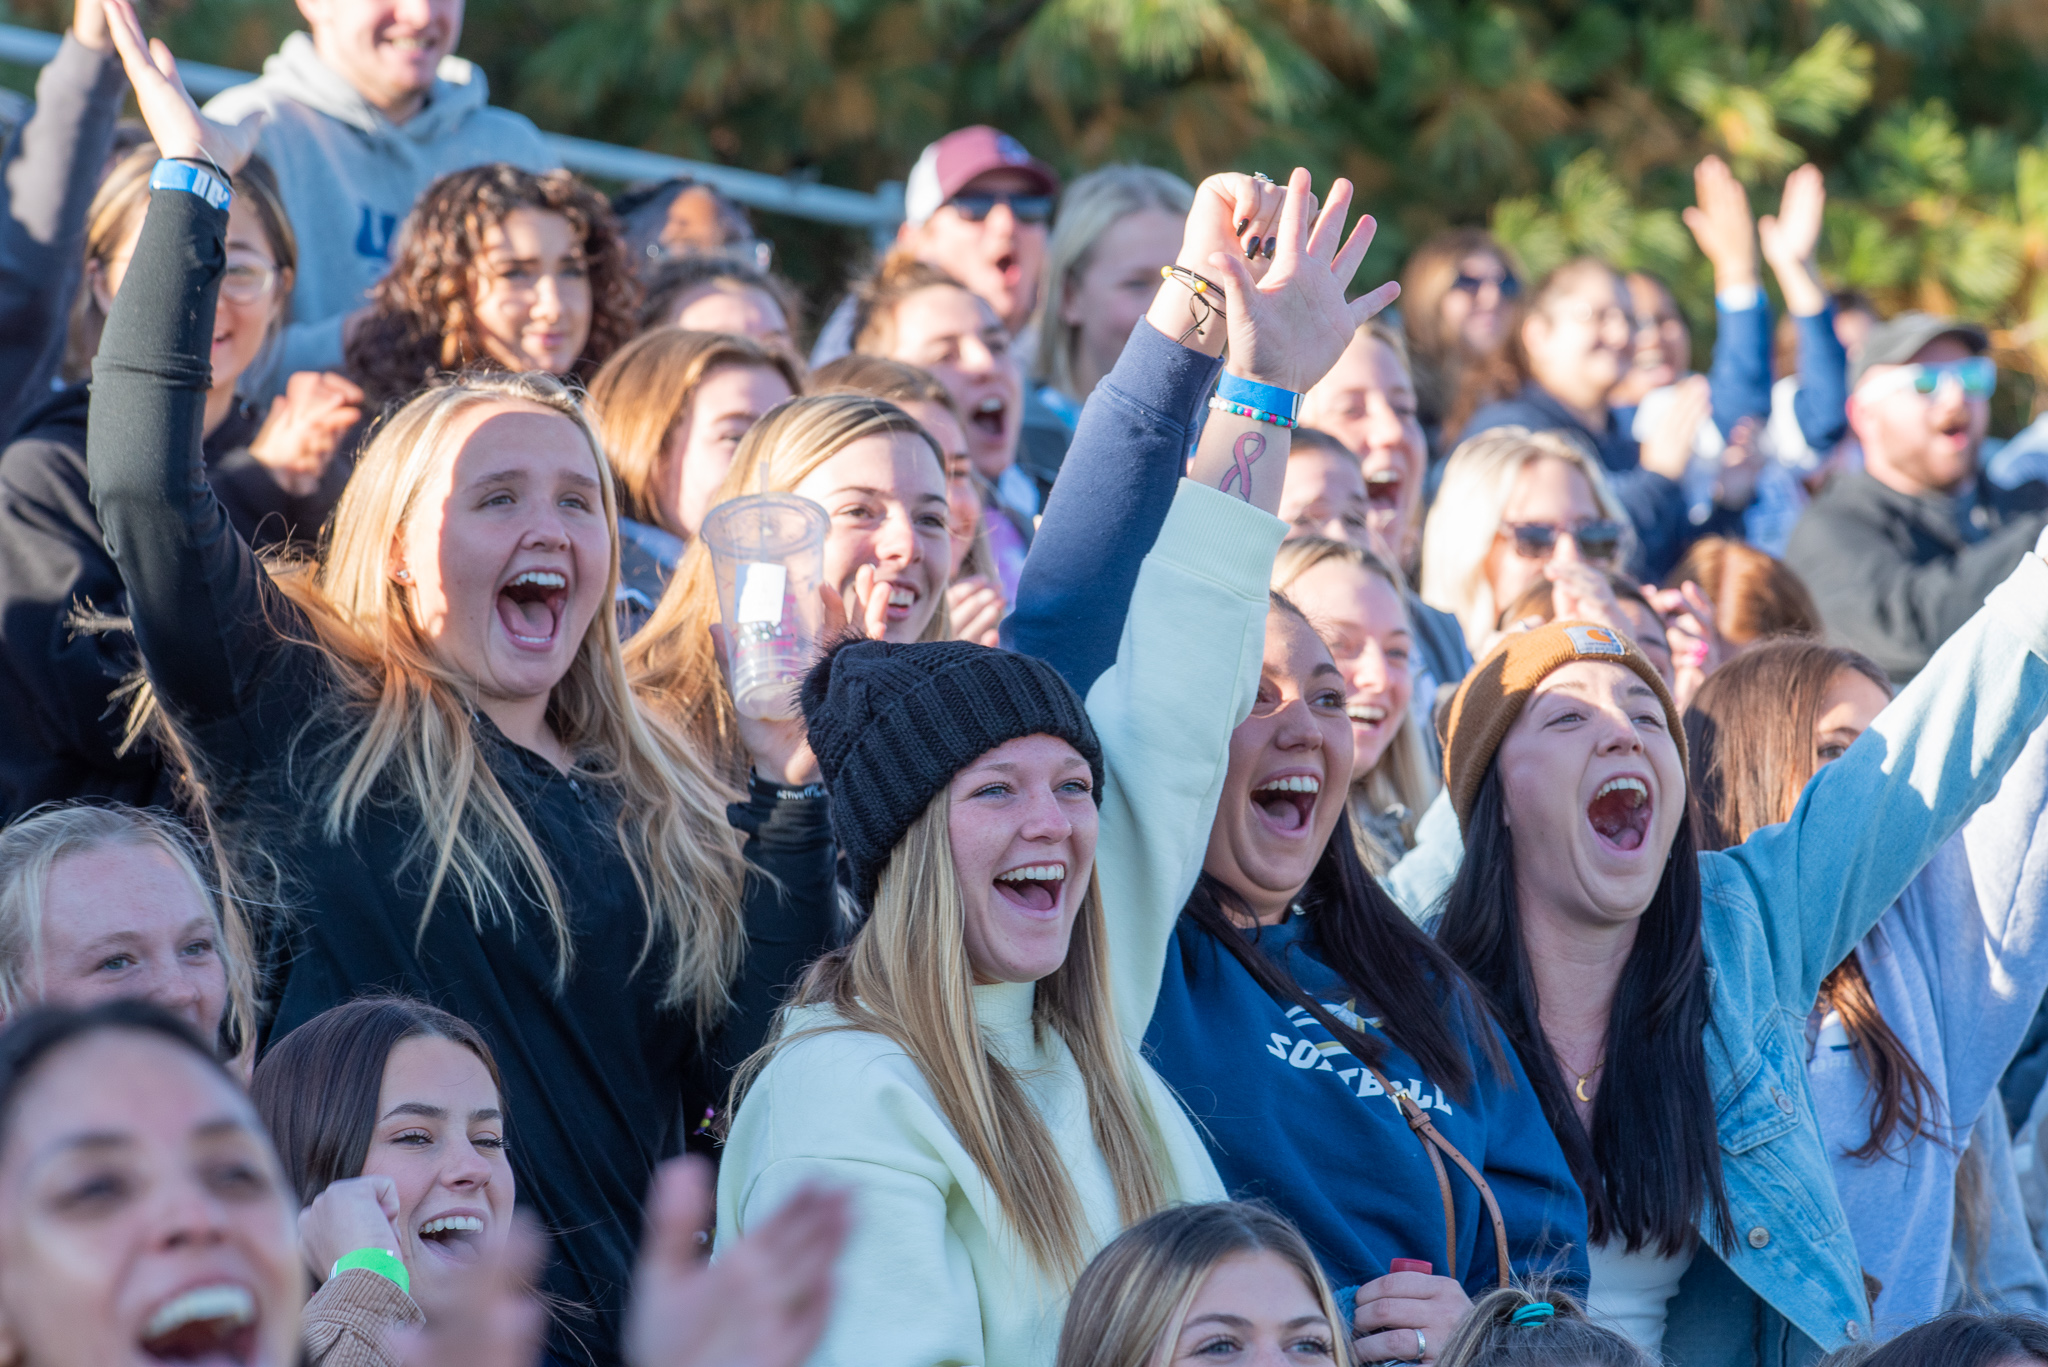 fans cheer in the stands at a soccer game after one of the players scored a goal for the home team, University of Illinois Springfield